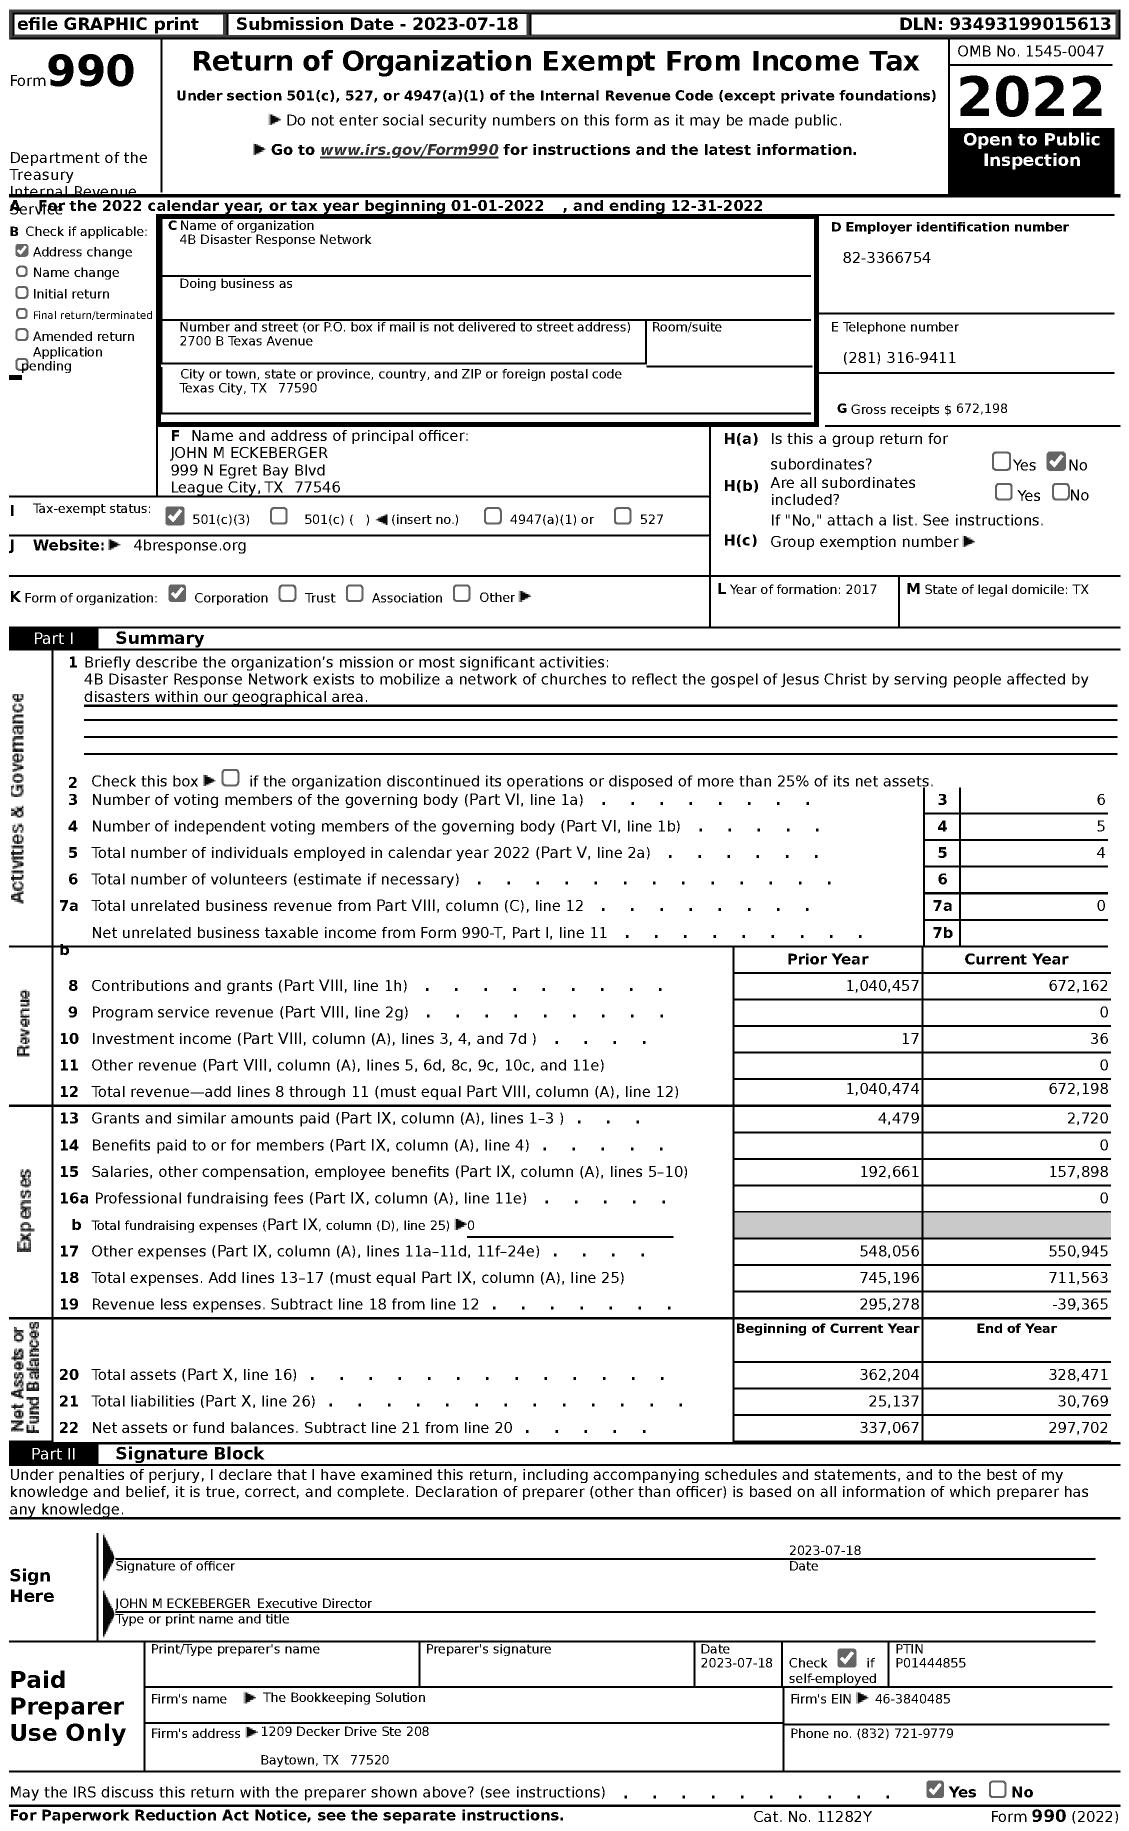 Image of first page of 2022 Form 990 for 4B Disaster Response Network